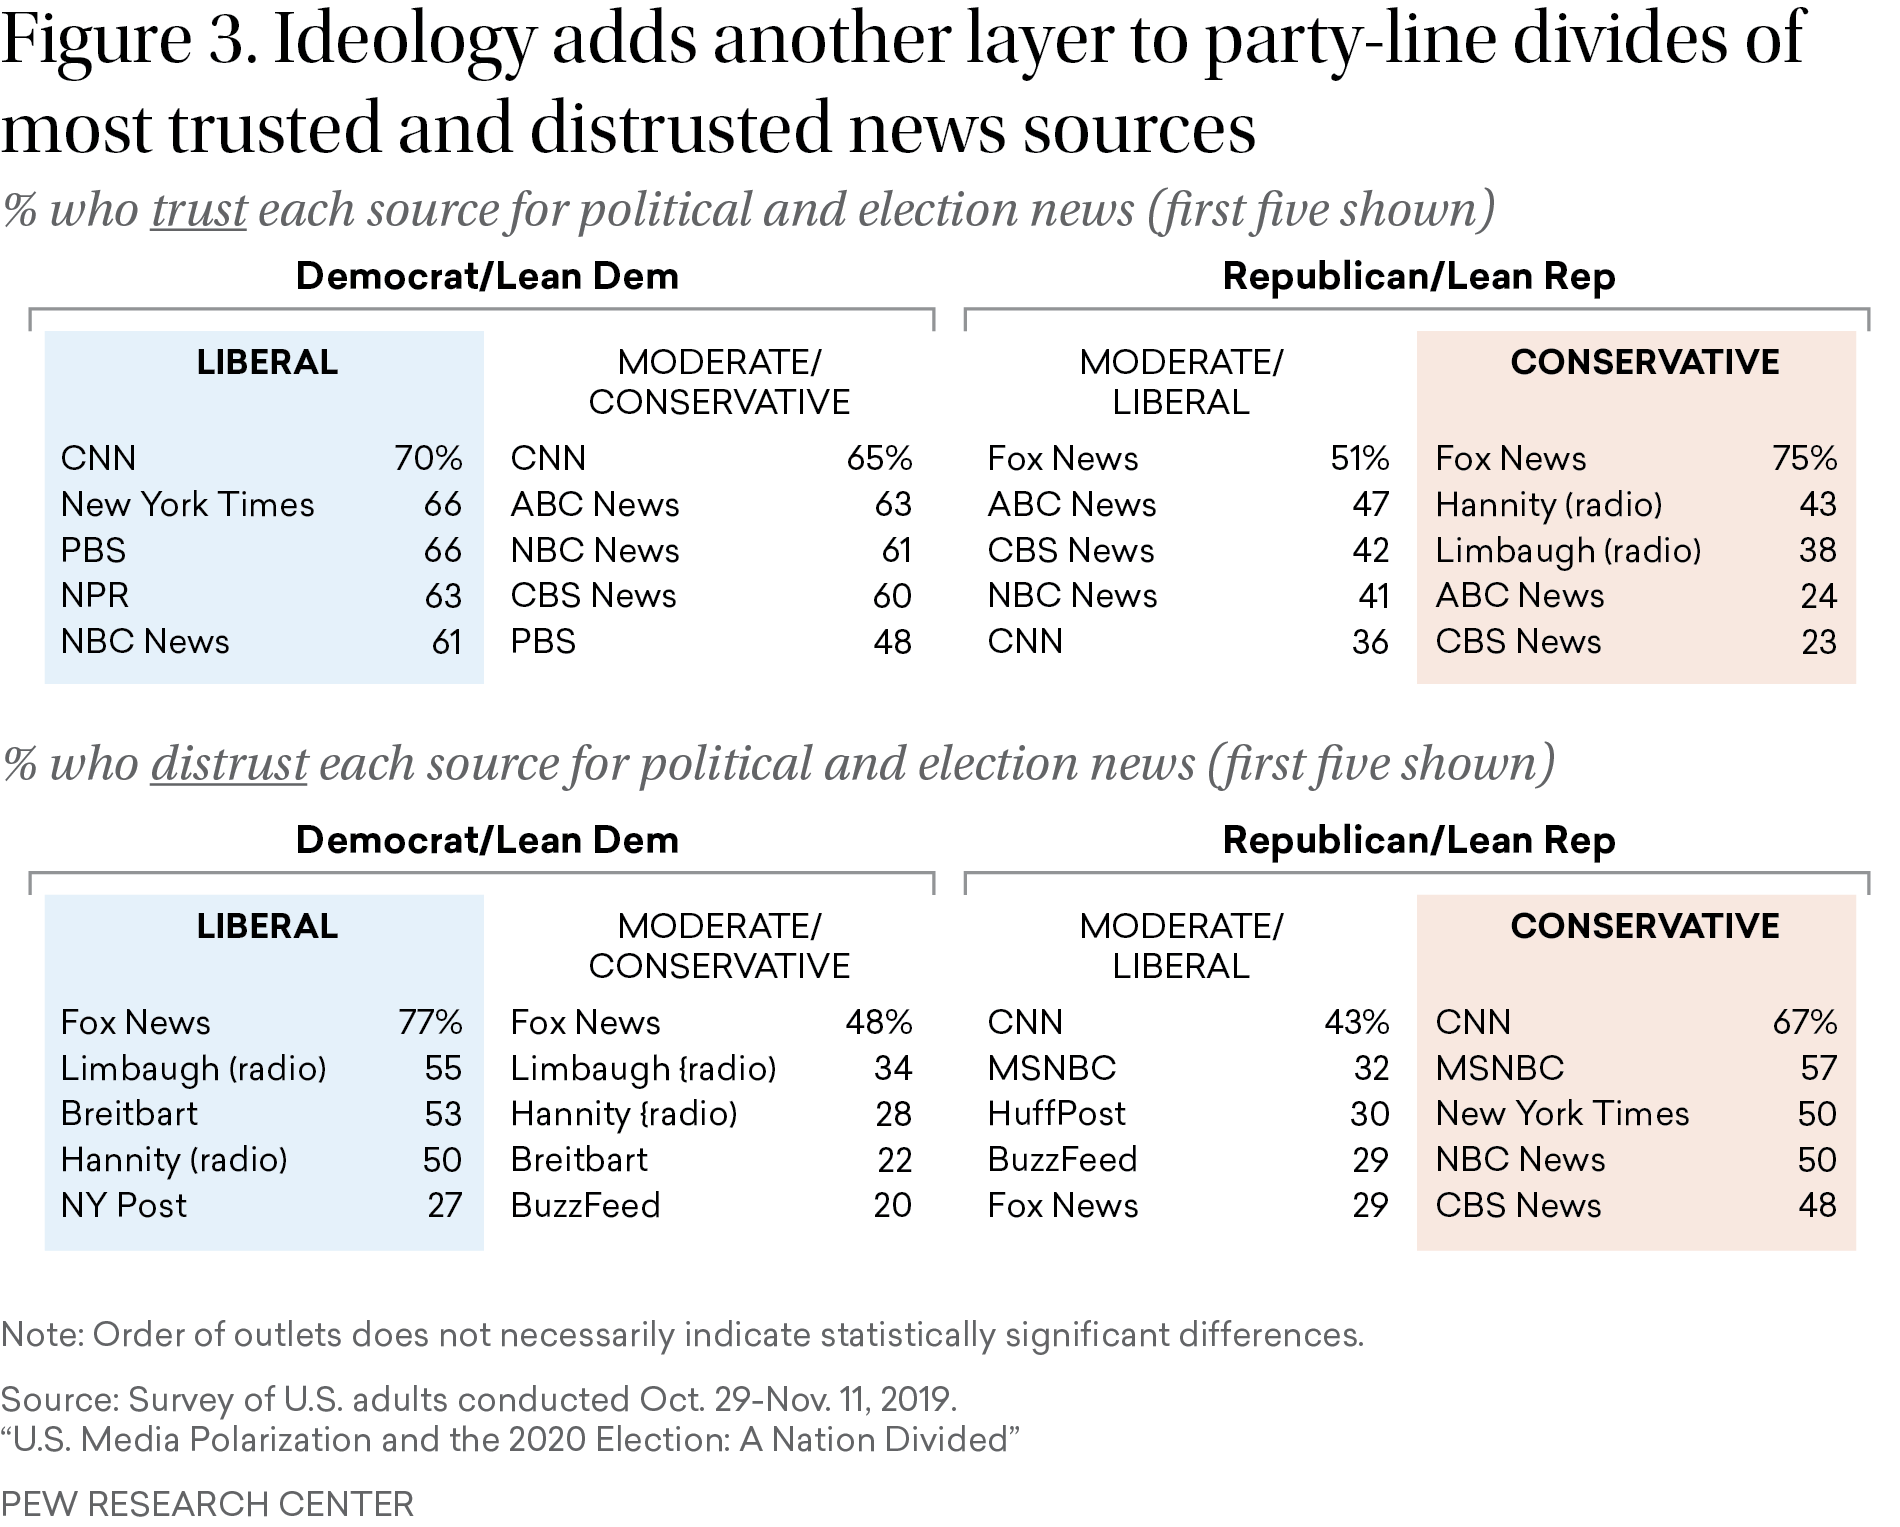 Figure 3: Four tables show Democrats and Republicans trust and distrust news sources in opposition, distrusting the outlets that the other trusts.